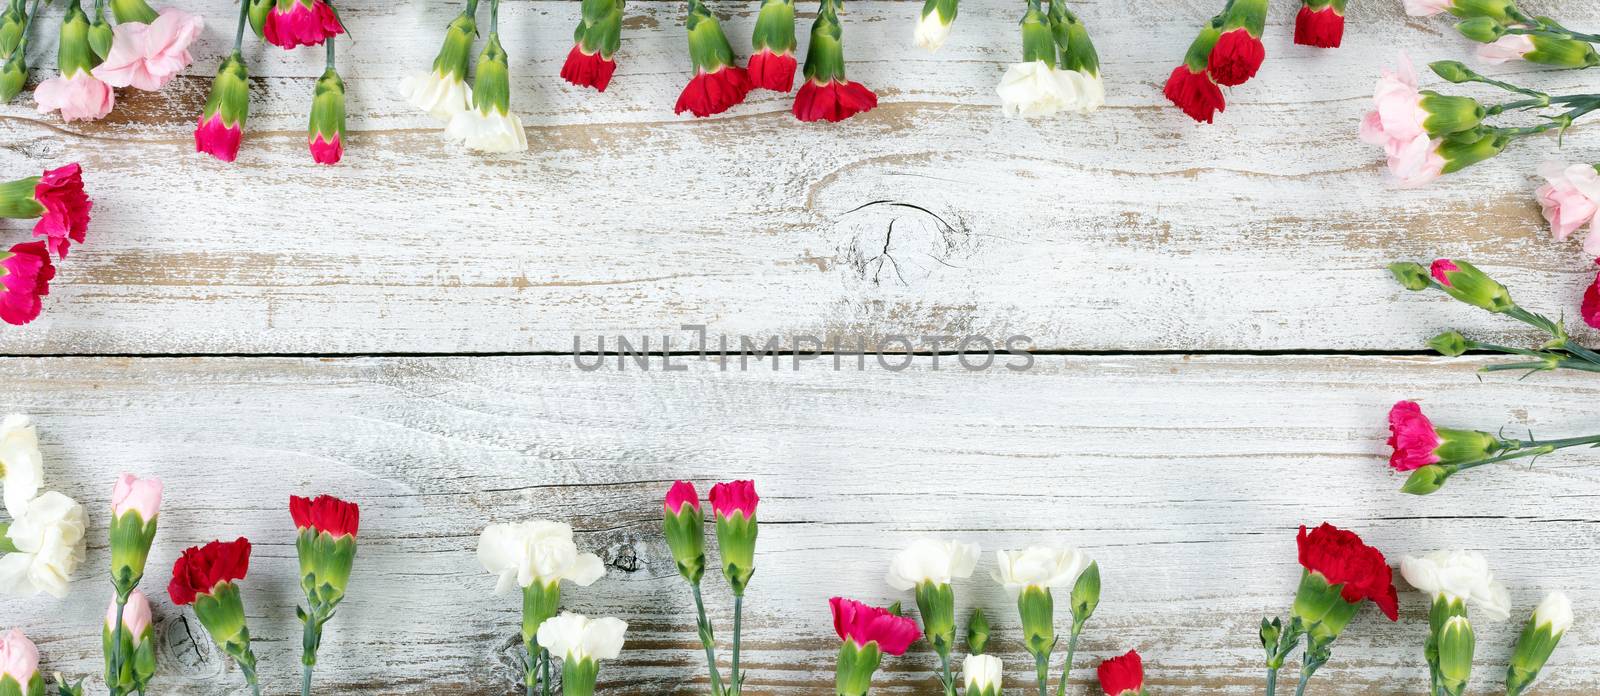 Colorful carnation flower rectangle border on white weathered wo by tab1962